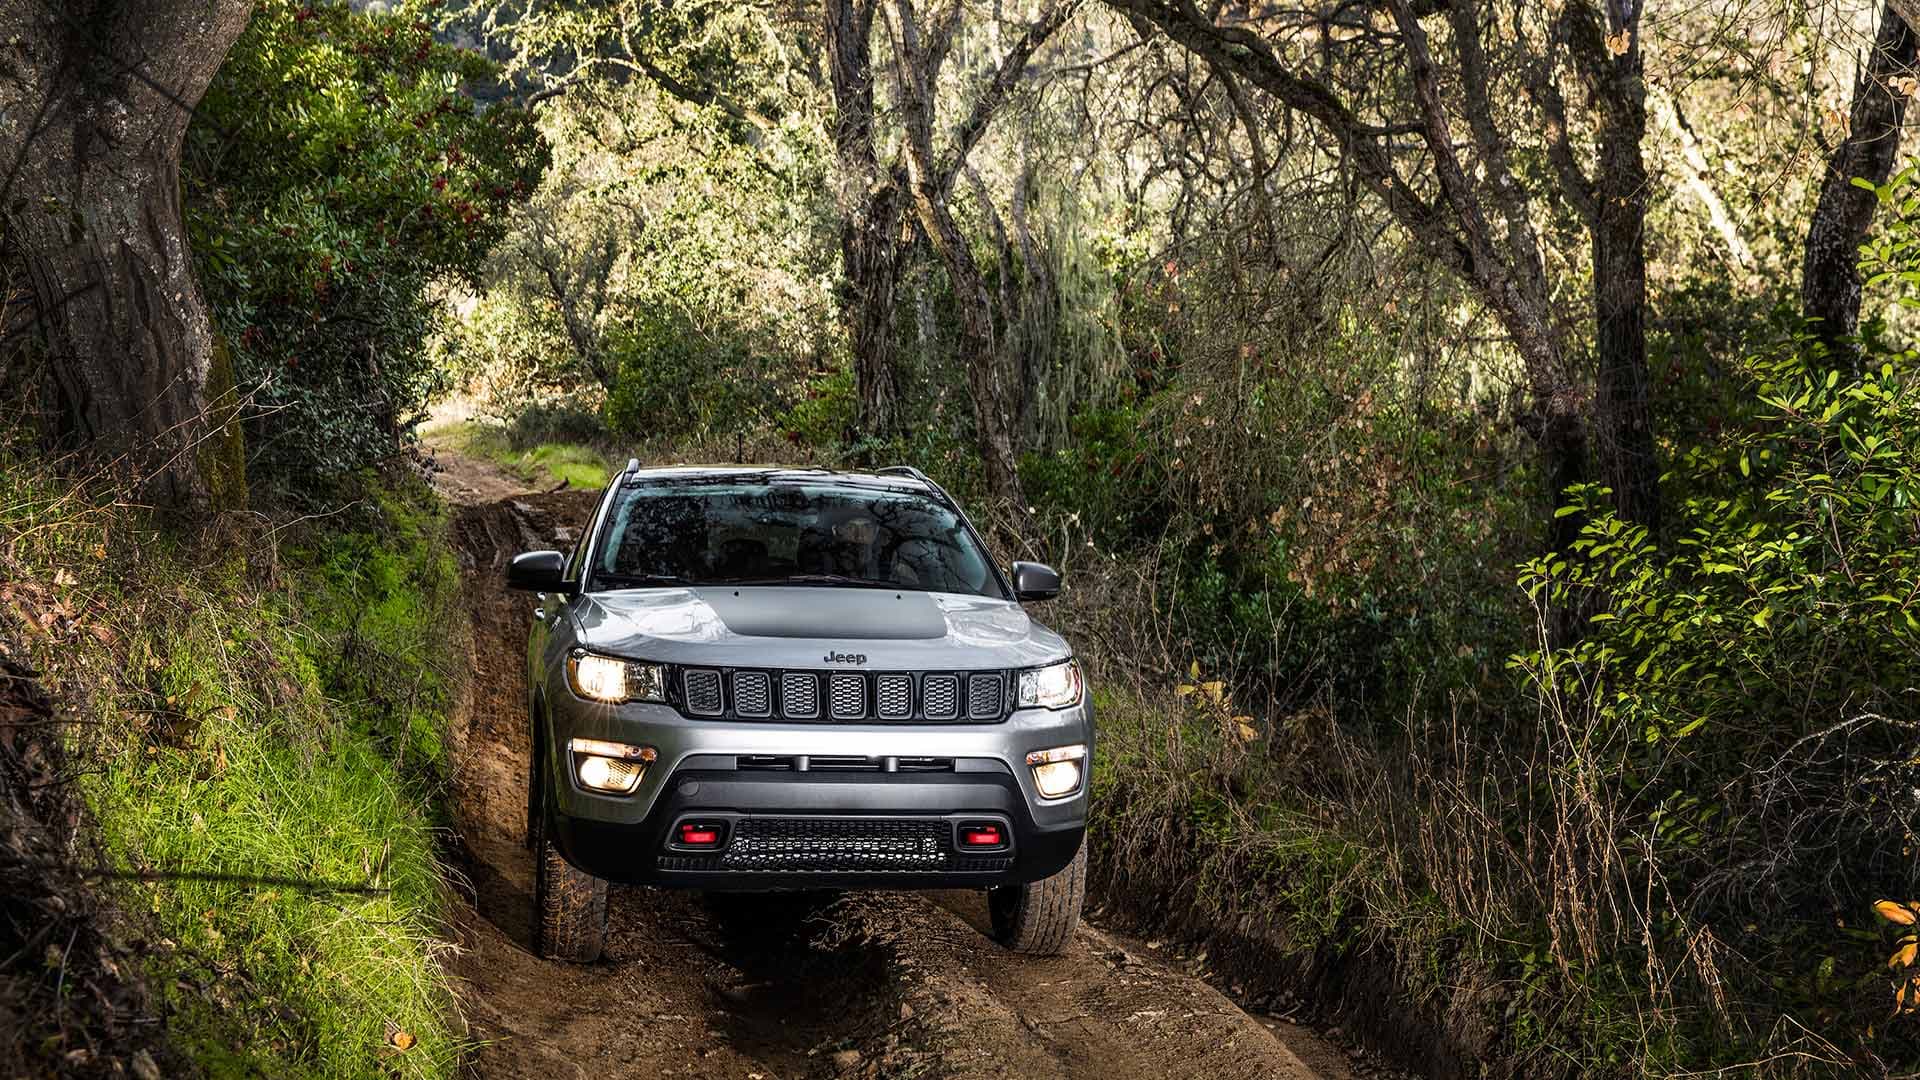 The All-New 2017 Jeep Compass Has Offroad Specs Worthy of The Badge